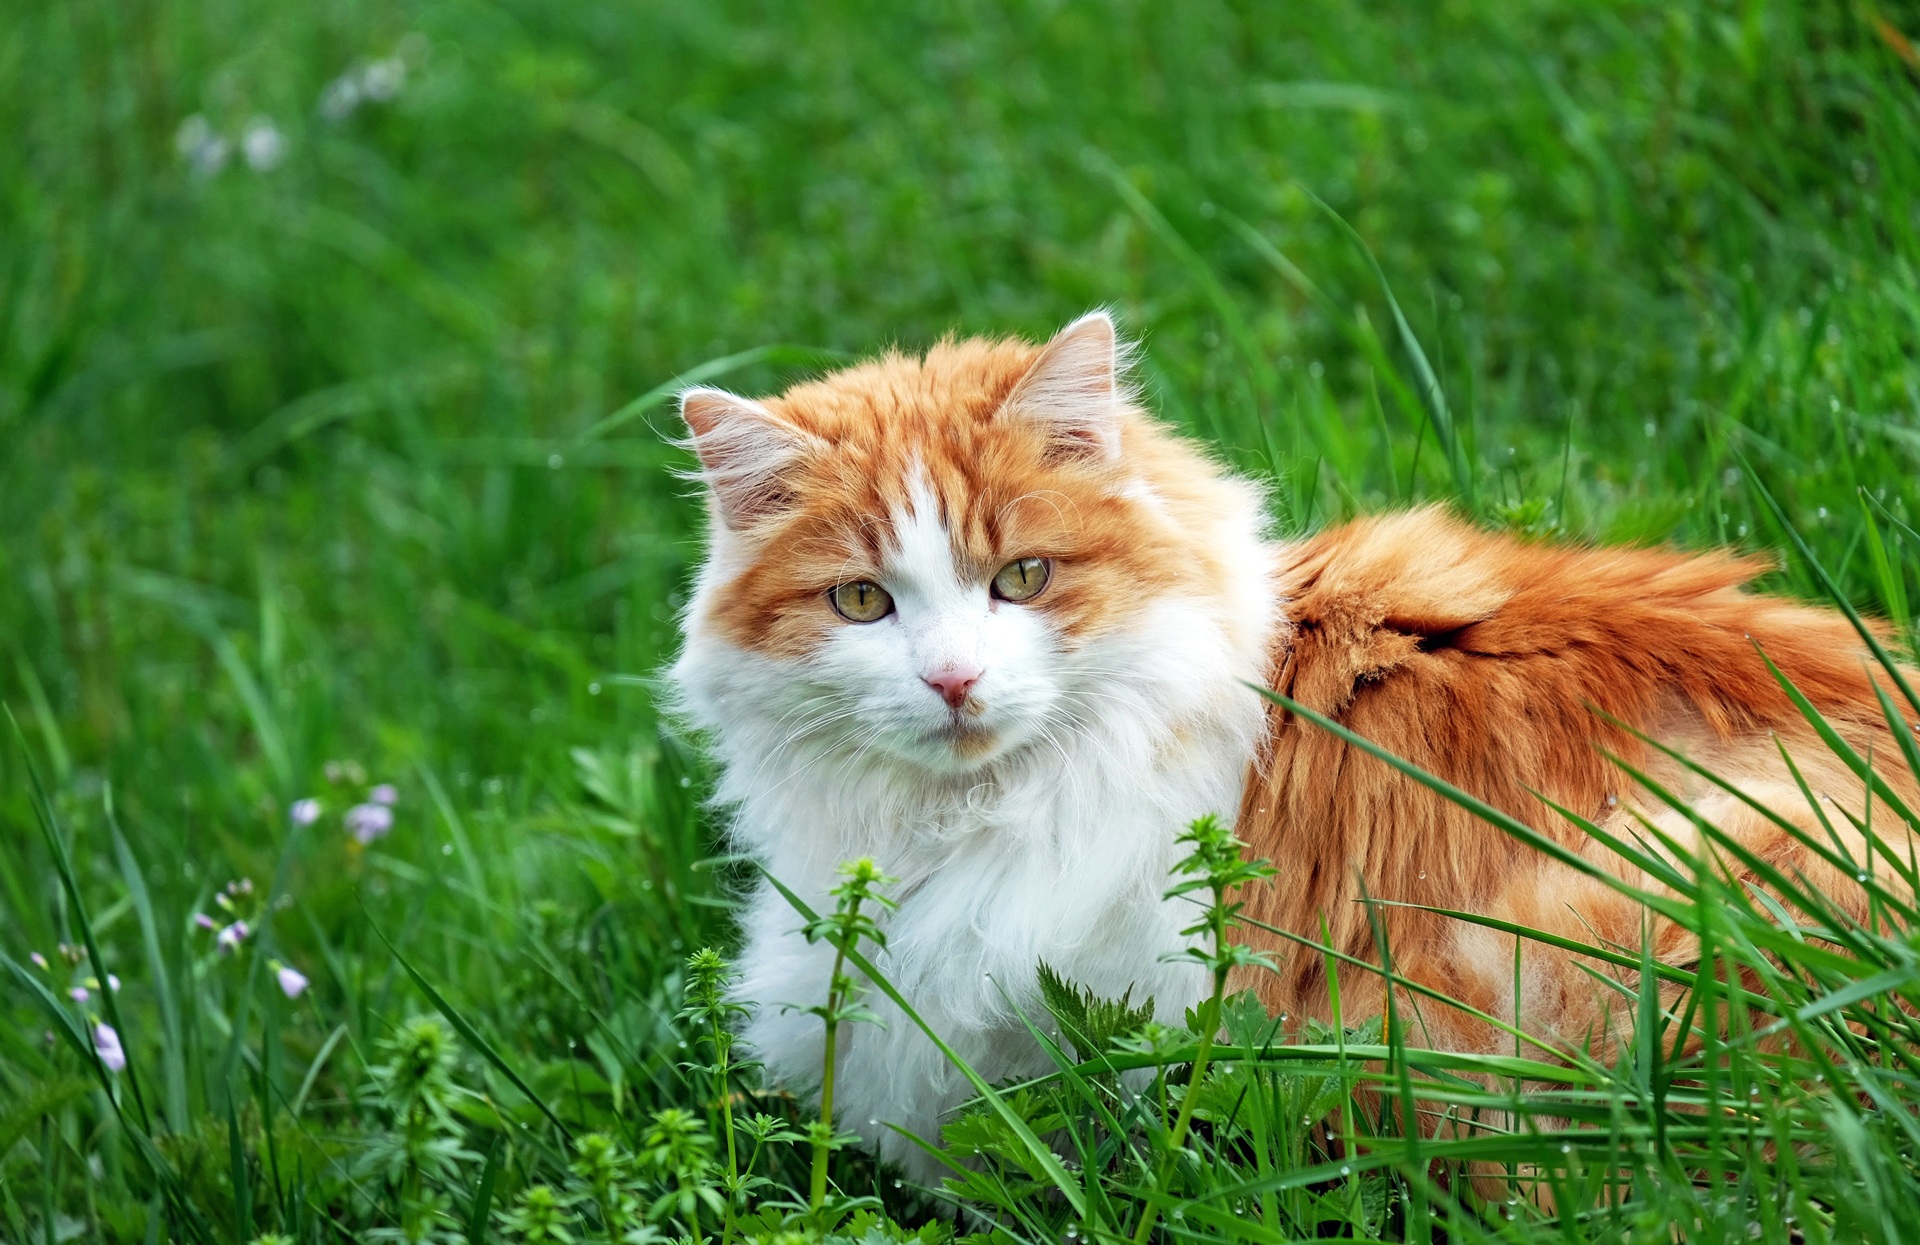 Ginger and White Cat in the Grass by Couleur